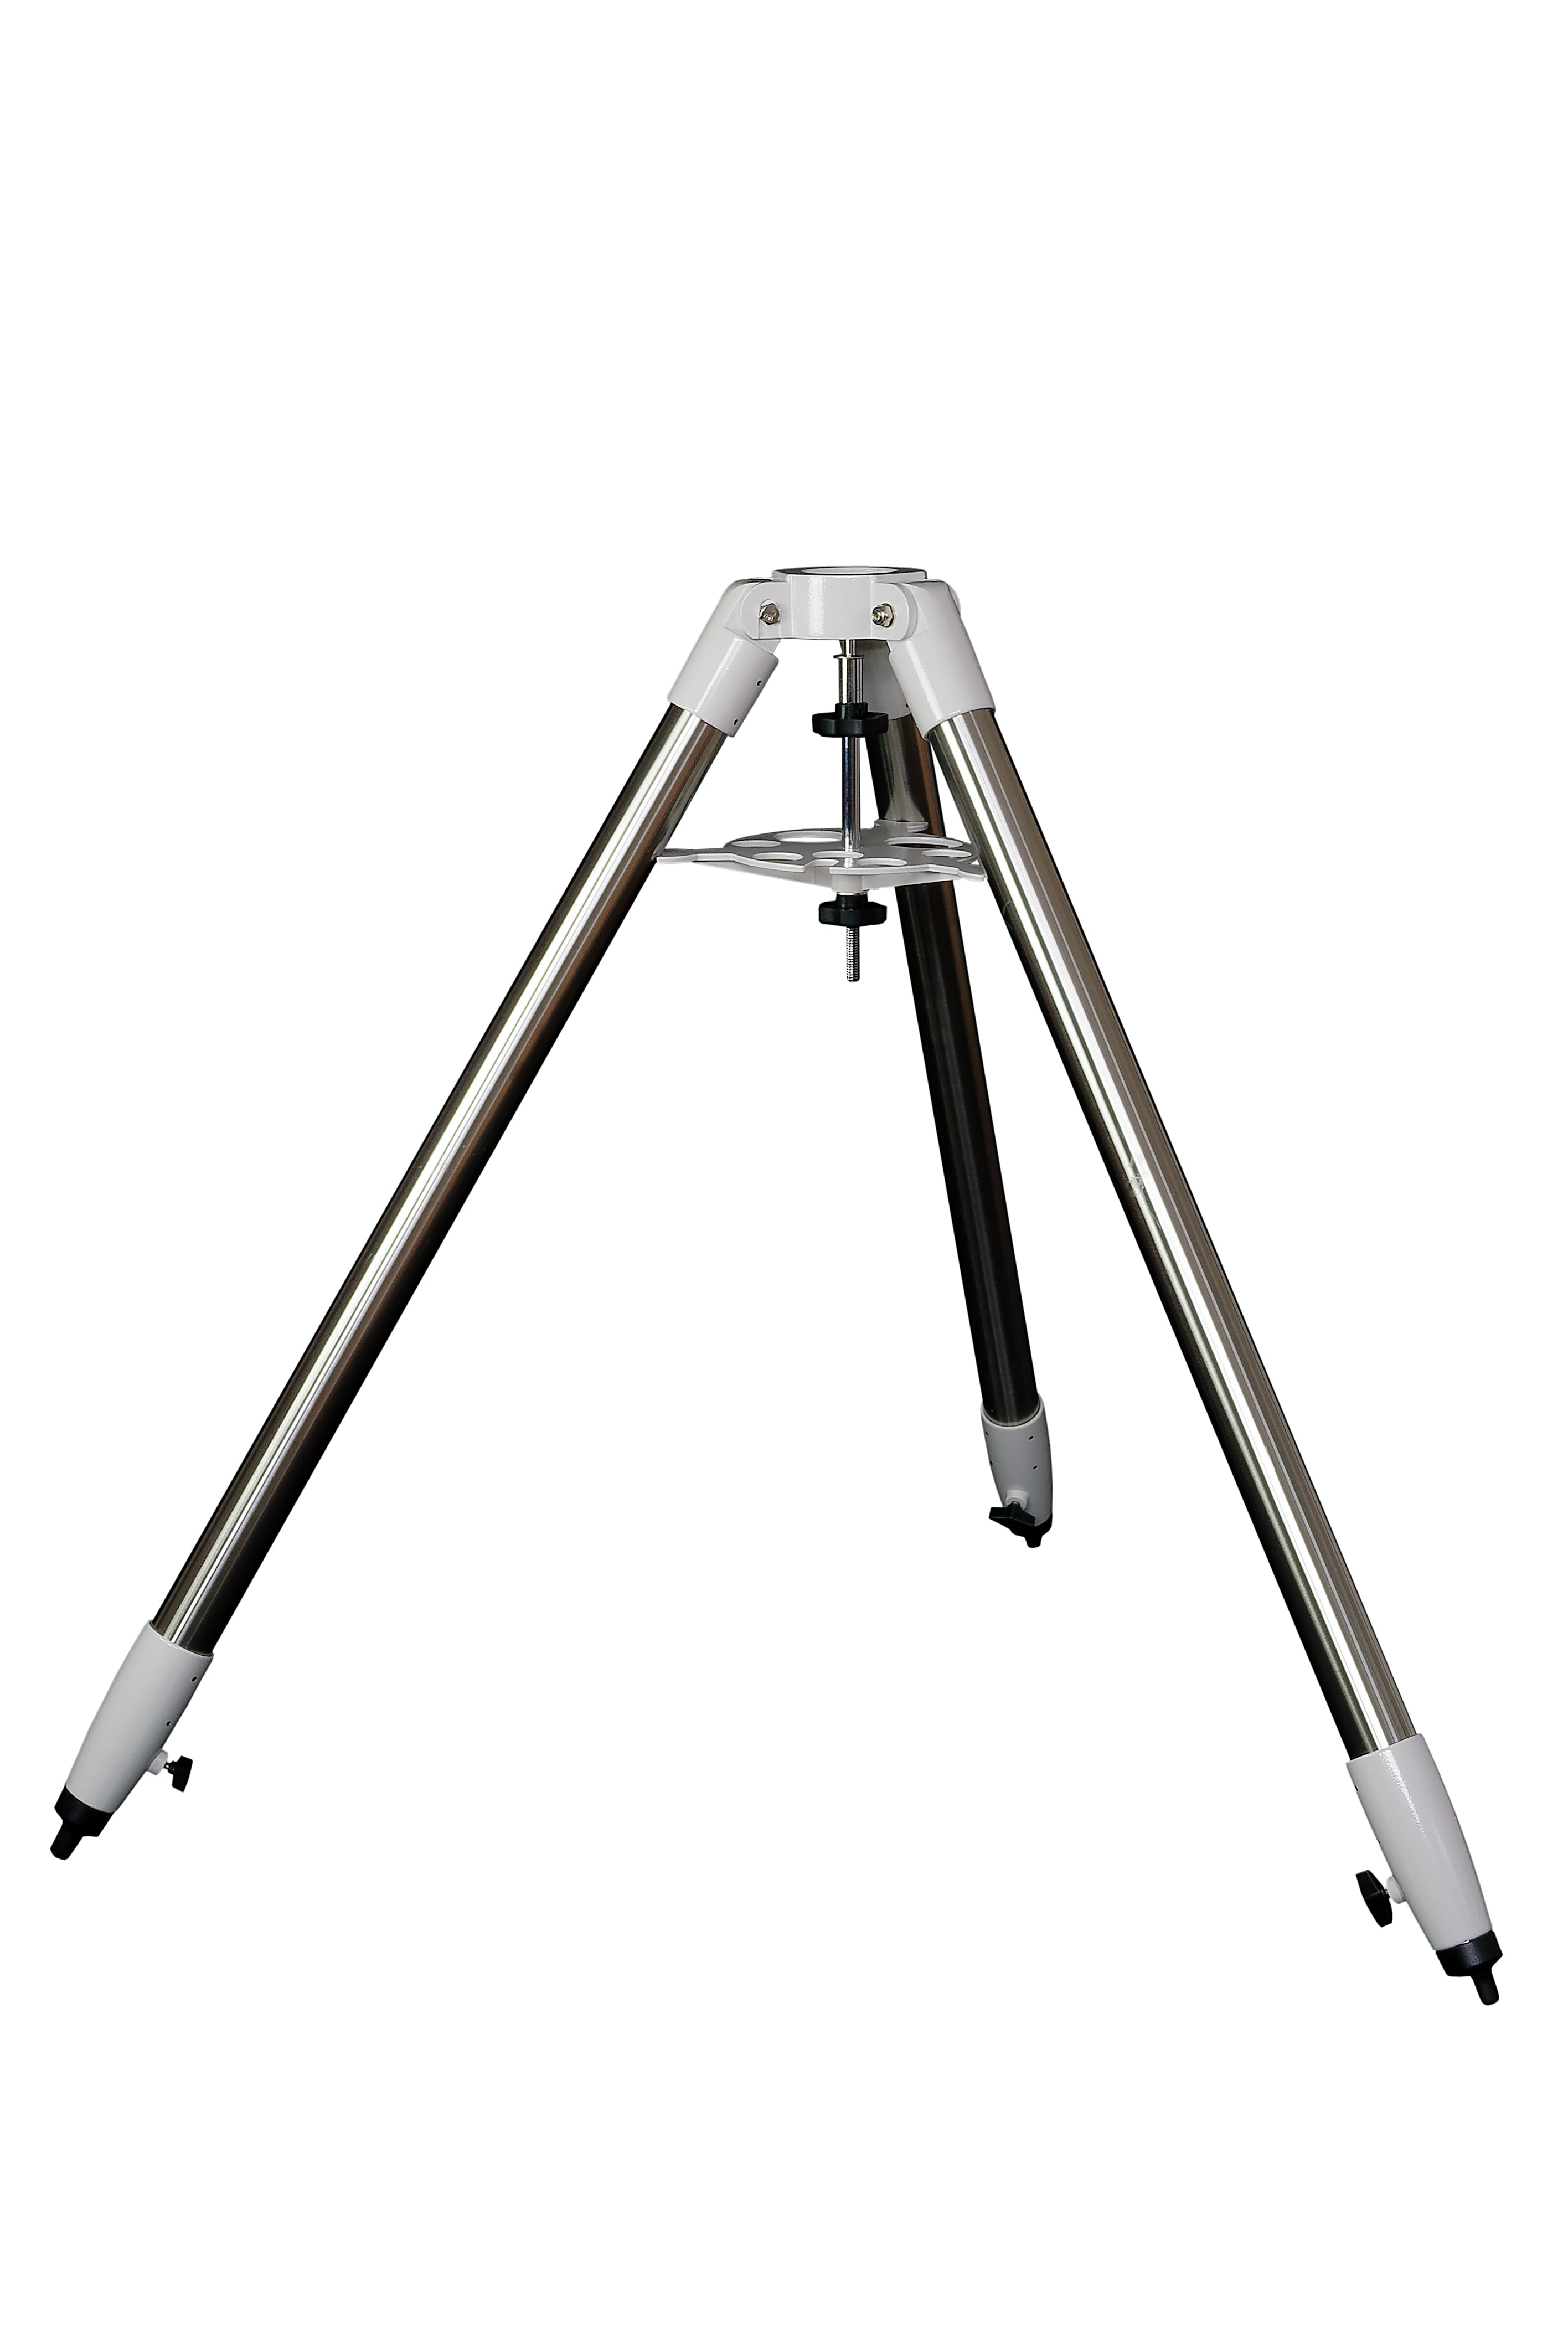 Product Image of Skywatcher 3/8" stainless steel tripod with 1.75" diameter legs. Astronomy 20316